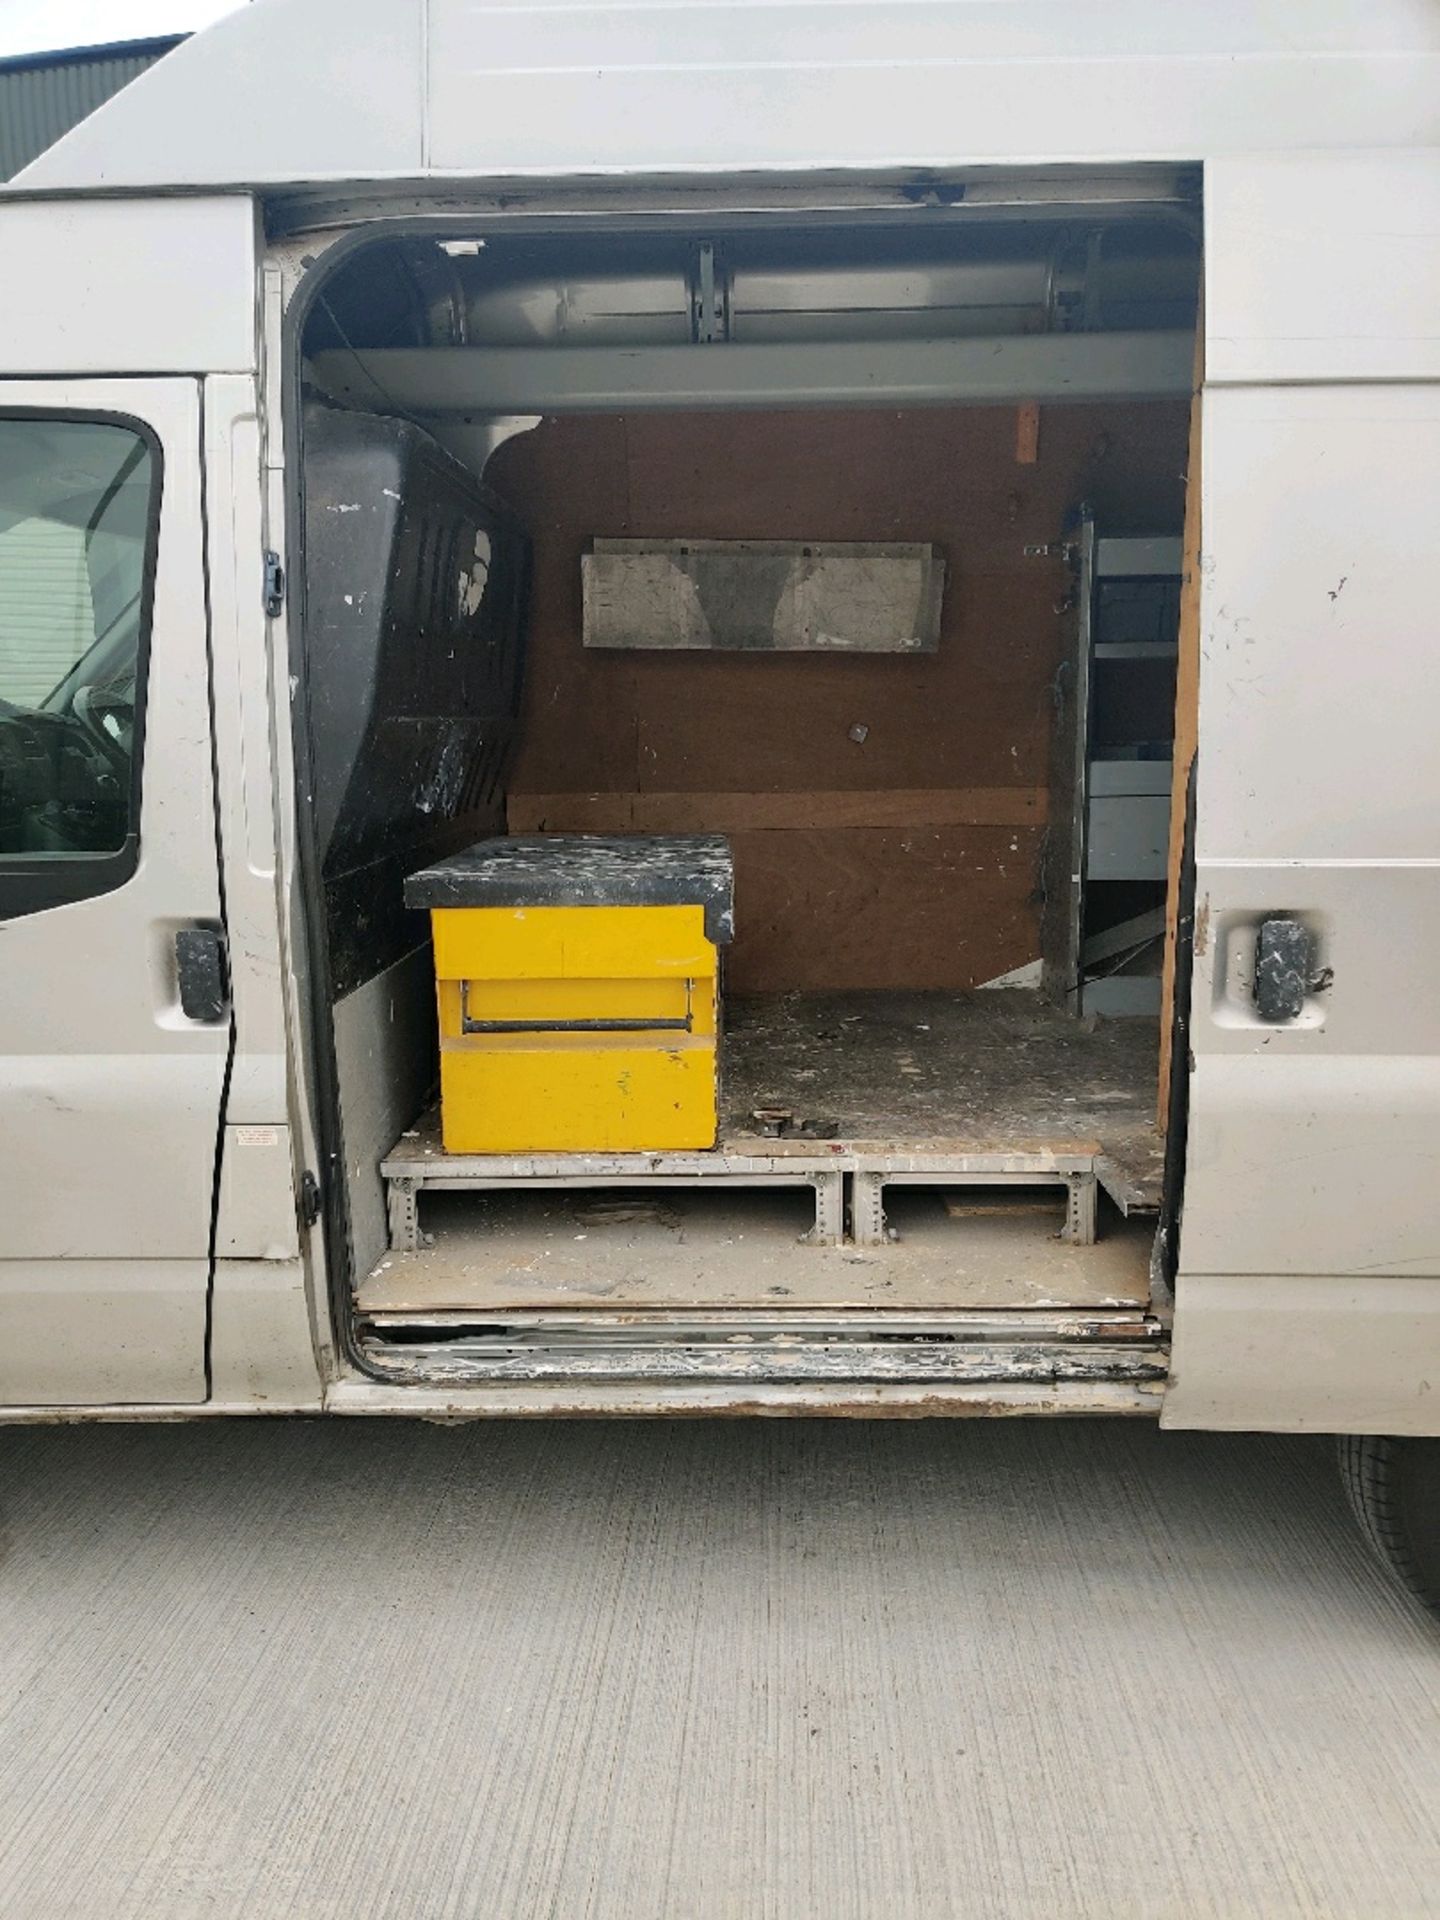 ENTRY DIRECT FROM LOCAL AUTHORITY Ford transit YR59NXC - Image 18 of 21